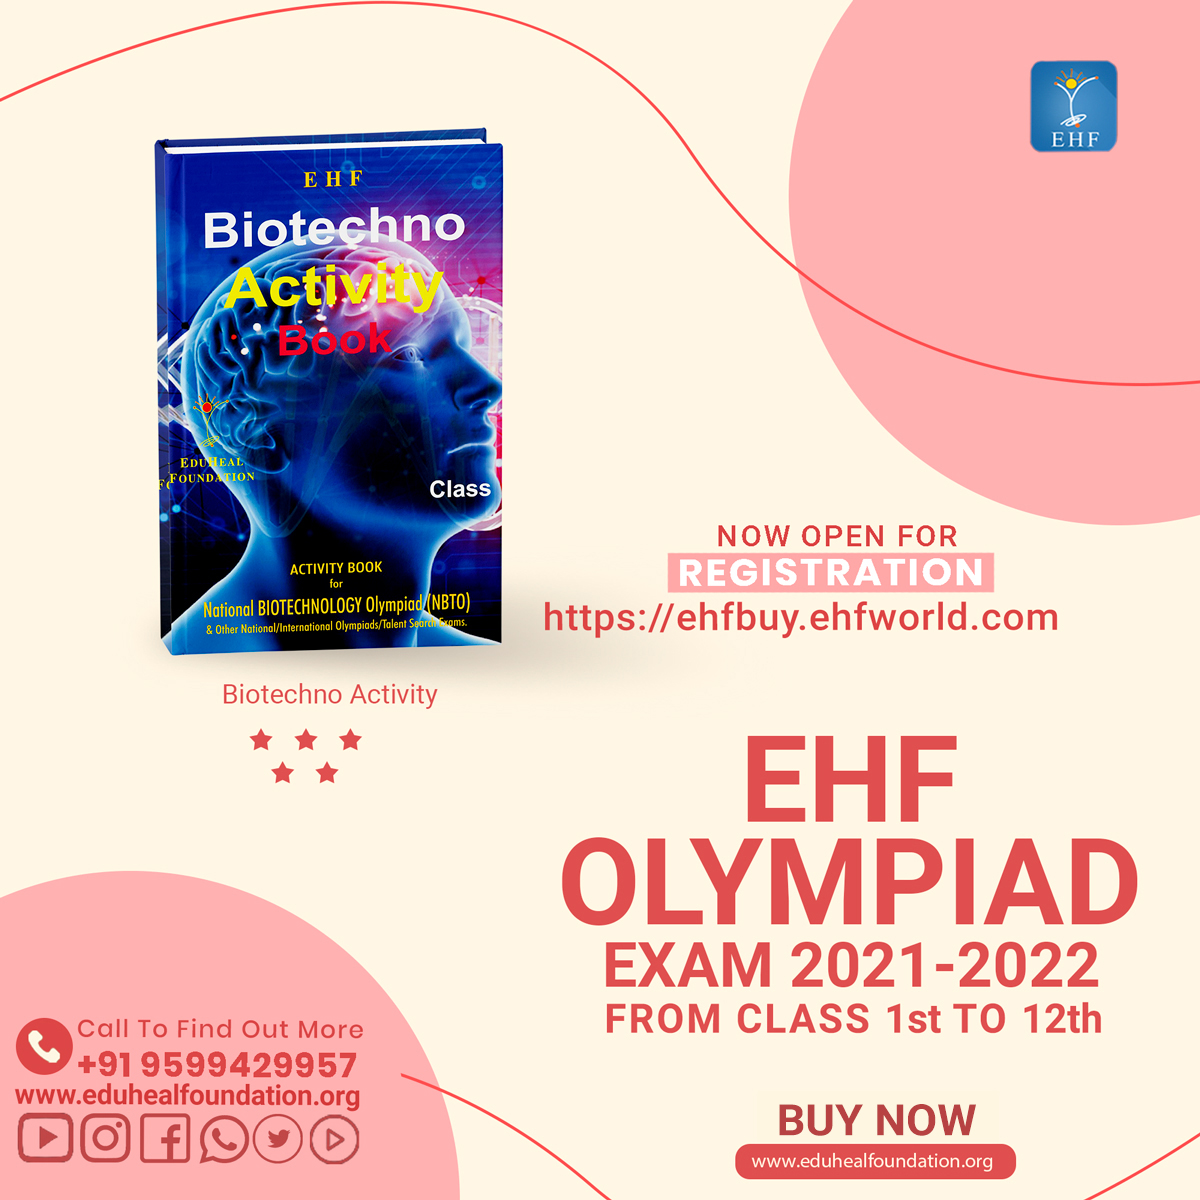 Explore The New World Of Biotechnology